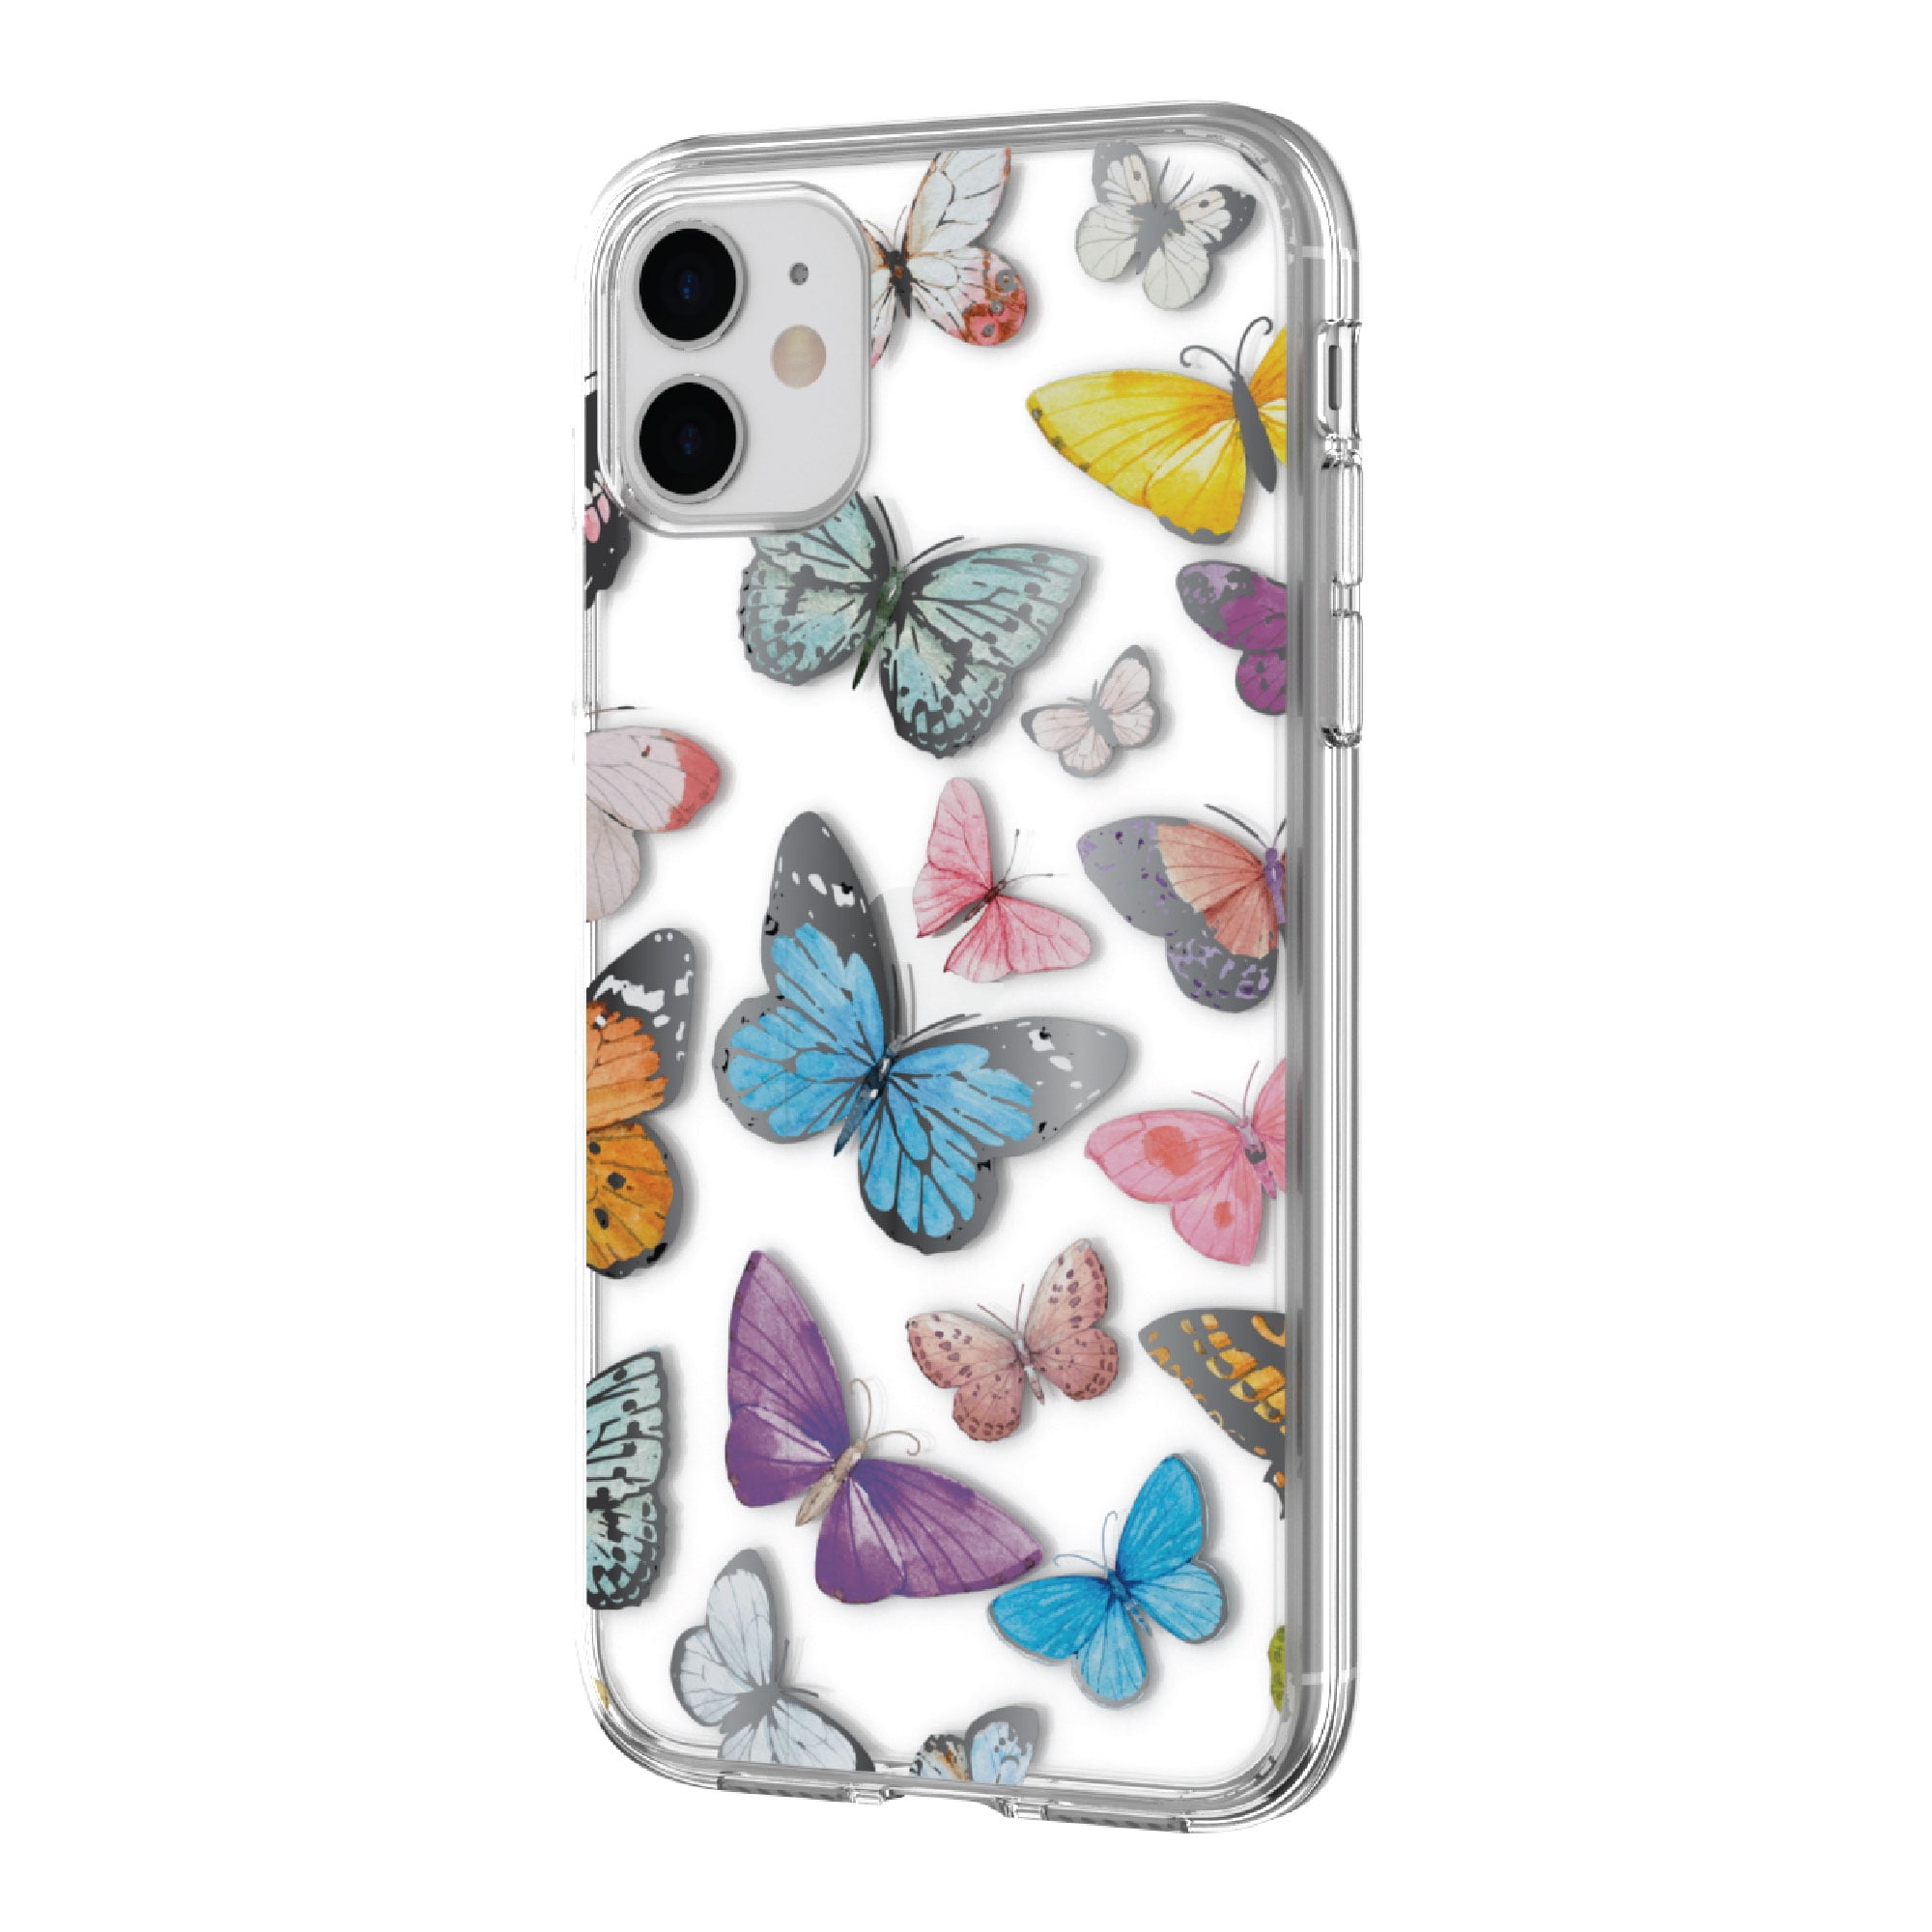 onn. Multicolored Butterflies Phone Case for iPhone 11 / iPhone XR